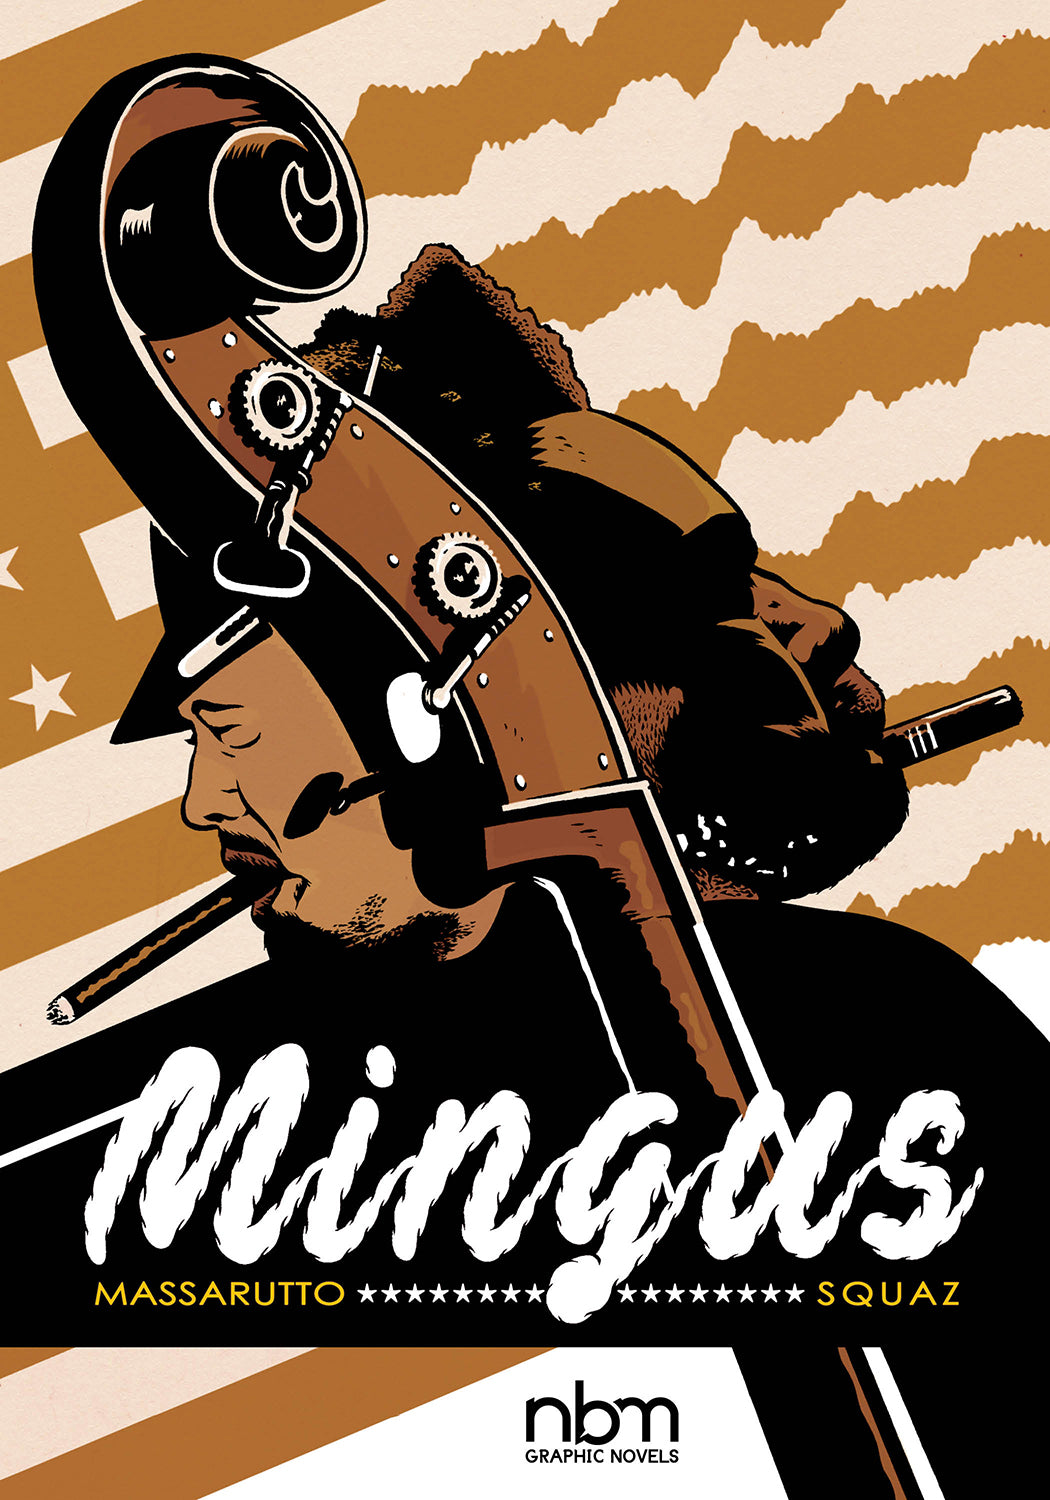 Charles MINGUS comics biography coming in August!